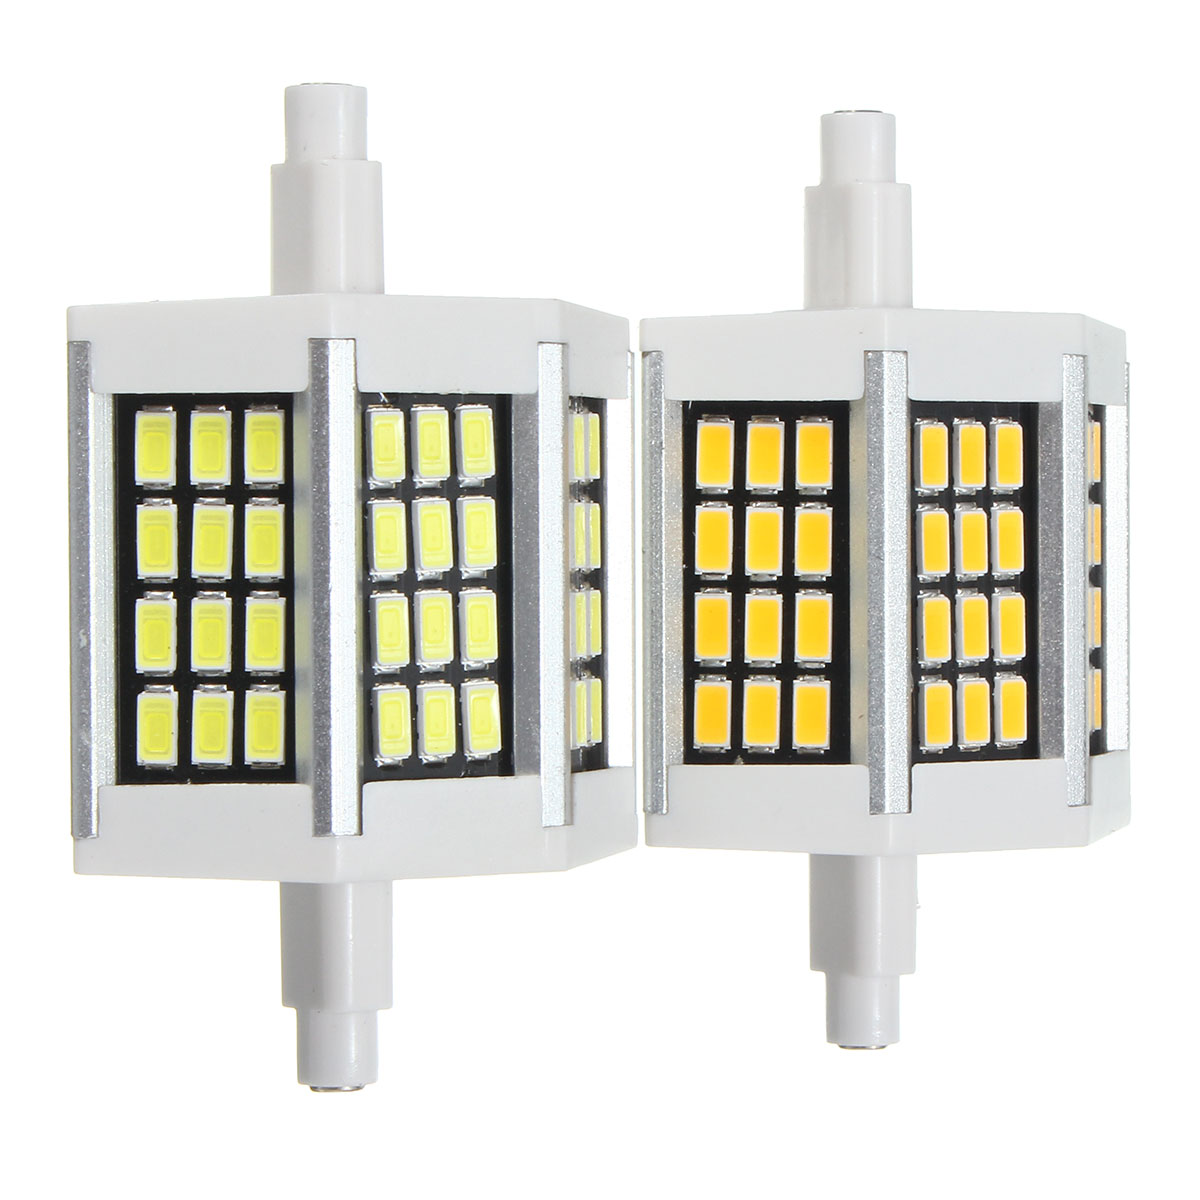 78MM-Non-dimmable-R7S-SMD5733-Warm-White-Pure-White-36-LED-Light-Bulb-AC110V-AC220V-1430529-1